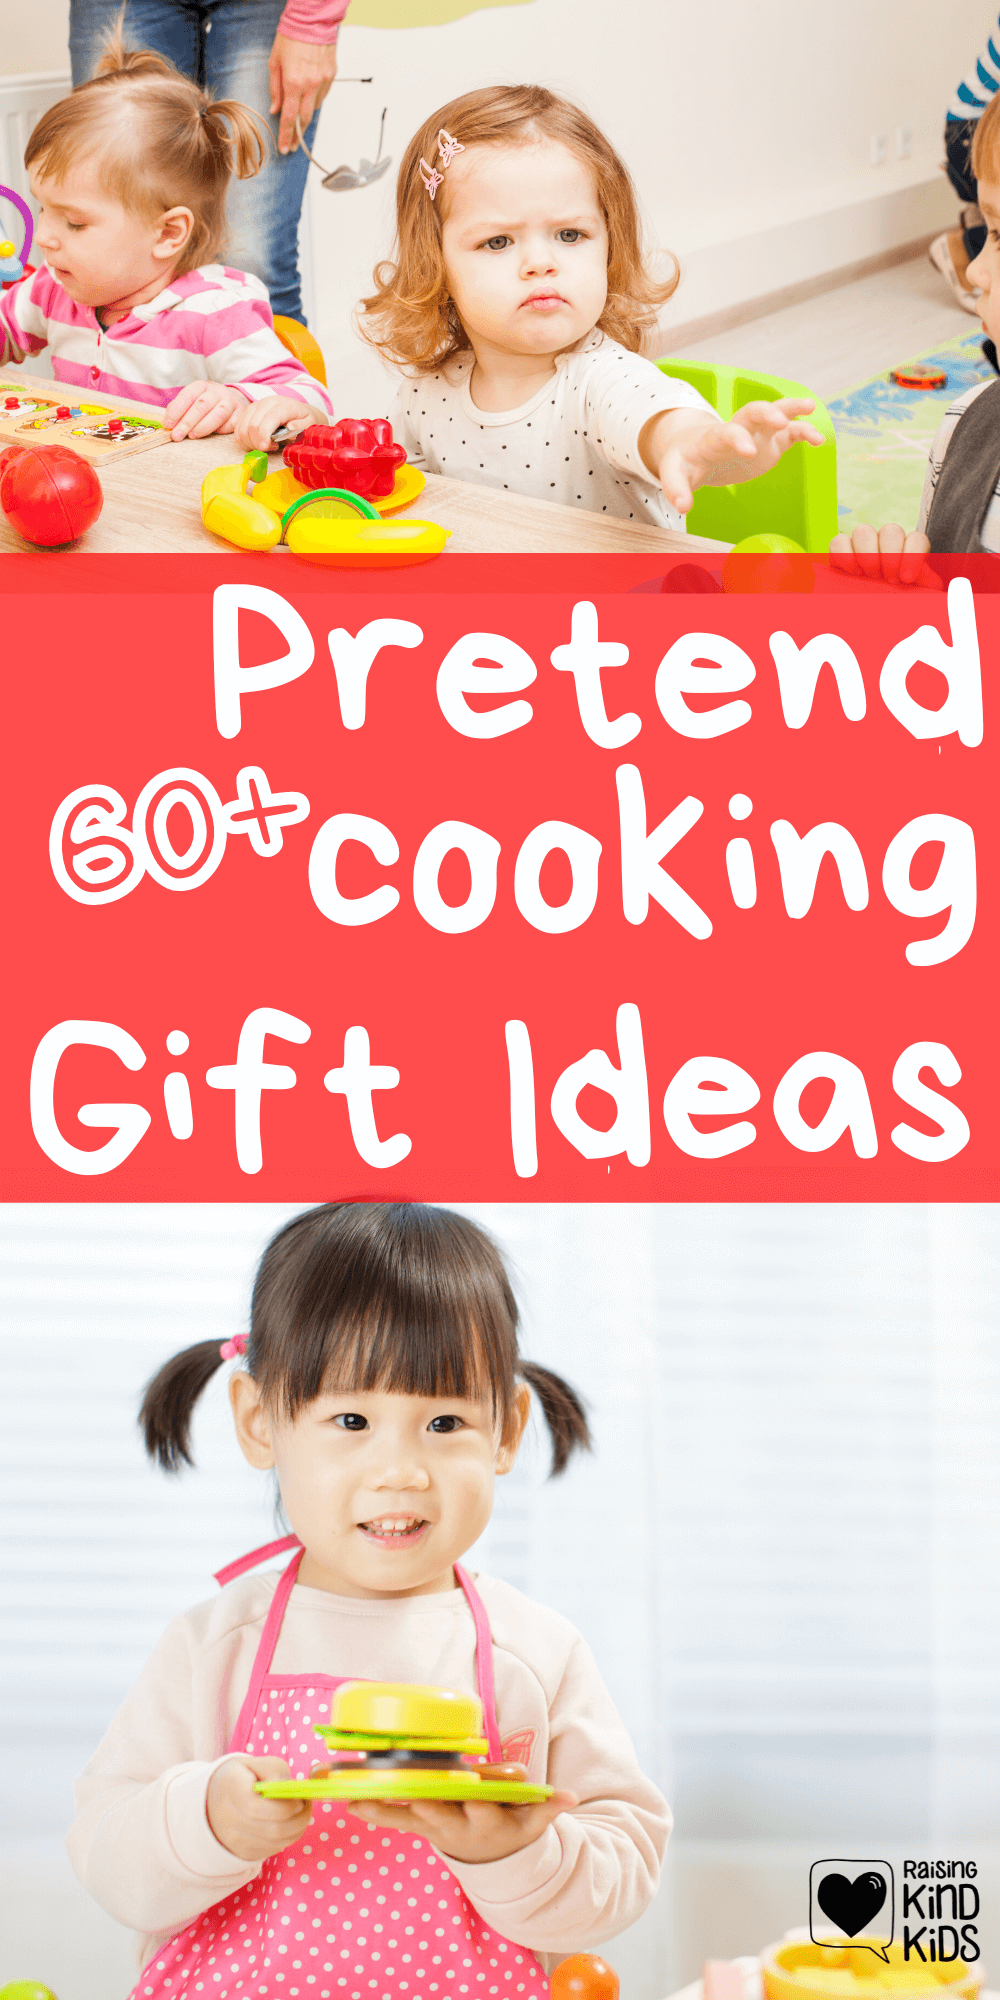 Have a kid who loves to play pretend? Then you need these 60+ perfect gifts for kids who love to pretend cook #gifts #giftsforkids #dramaticplaygifts #playislearning #playiswork #positiveparenting #parenting101 #holidaygifts #christmasgifts #giftlists #giftideasforkids #creativegiftsforkids #coffeeandcarpool